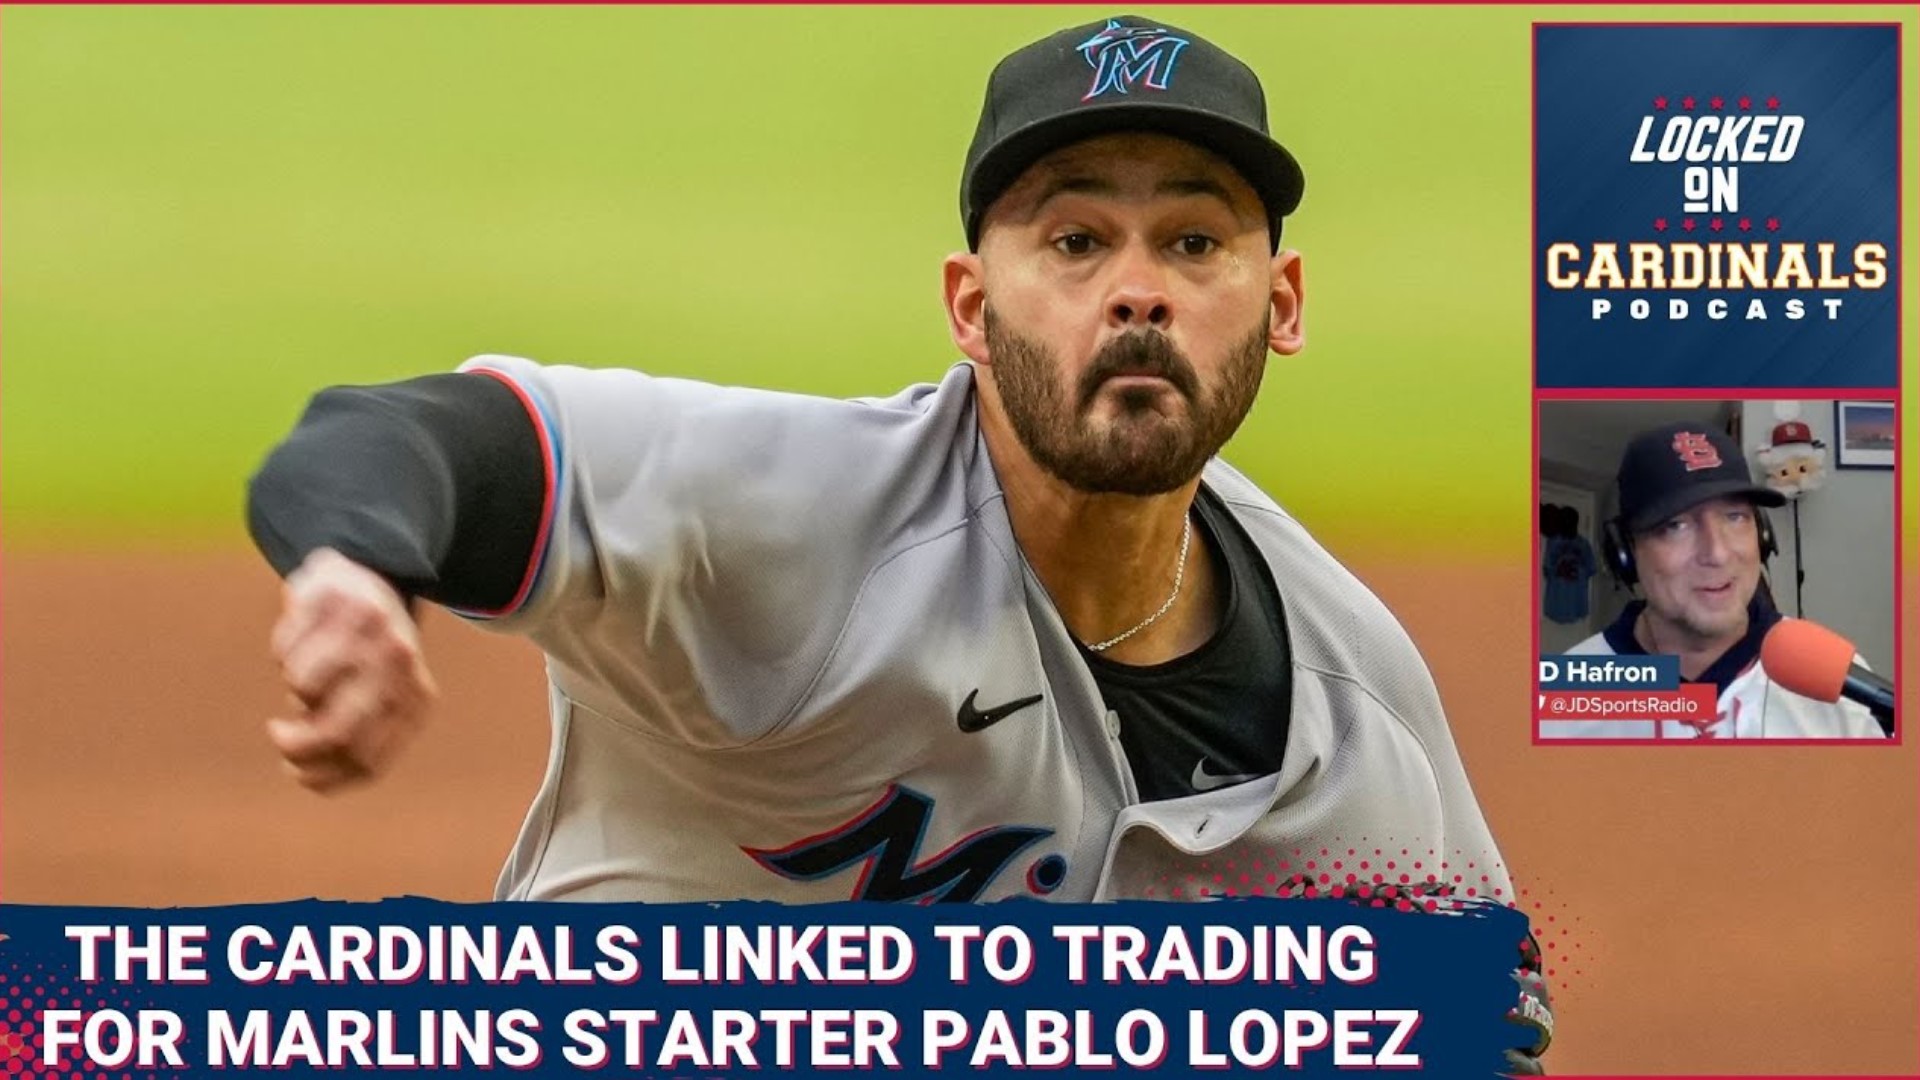 The trade rumors between the Miami Marlins and the St. Louis Cardinals continue to swirl. It centers around starting pitcher Pablo Lopez.